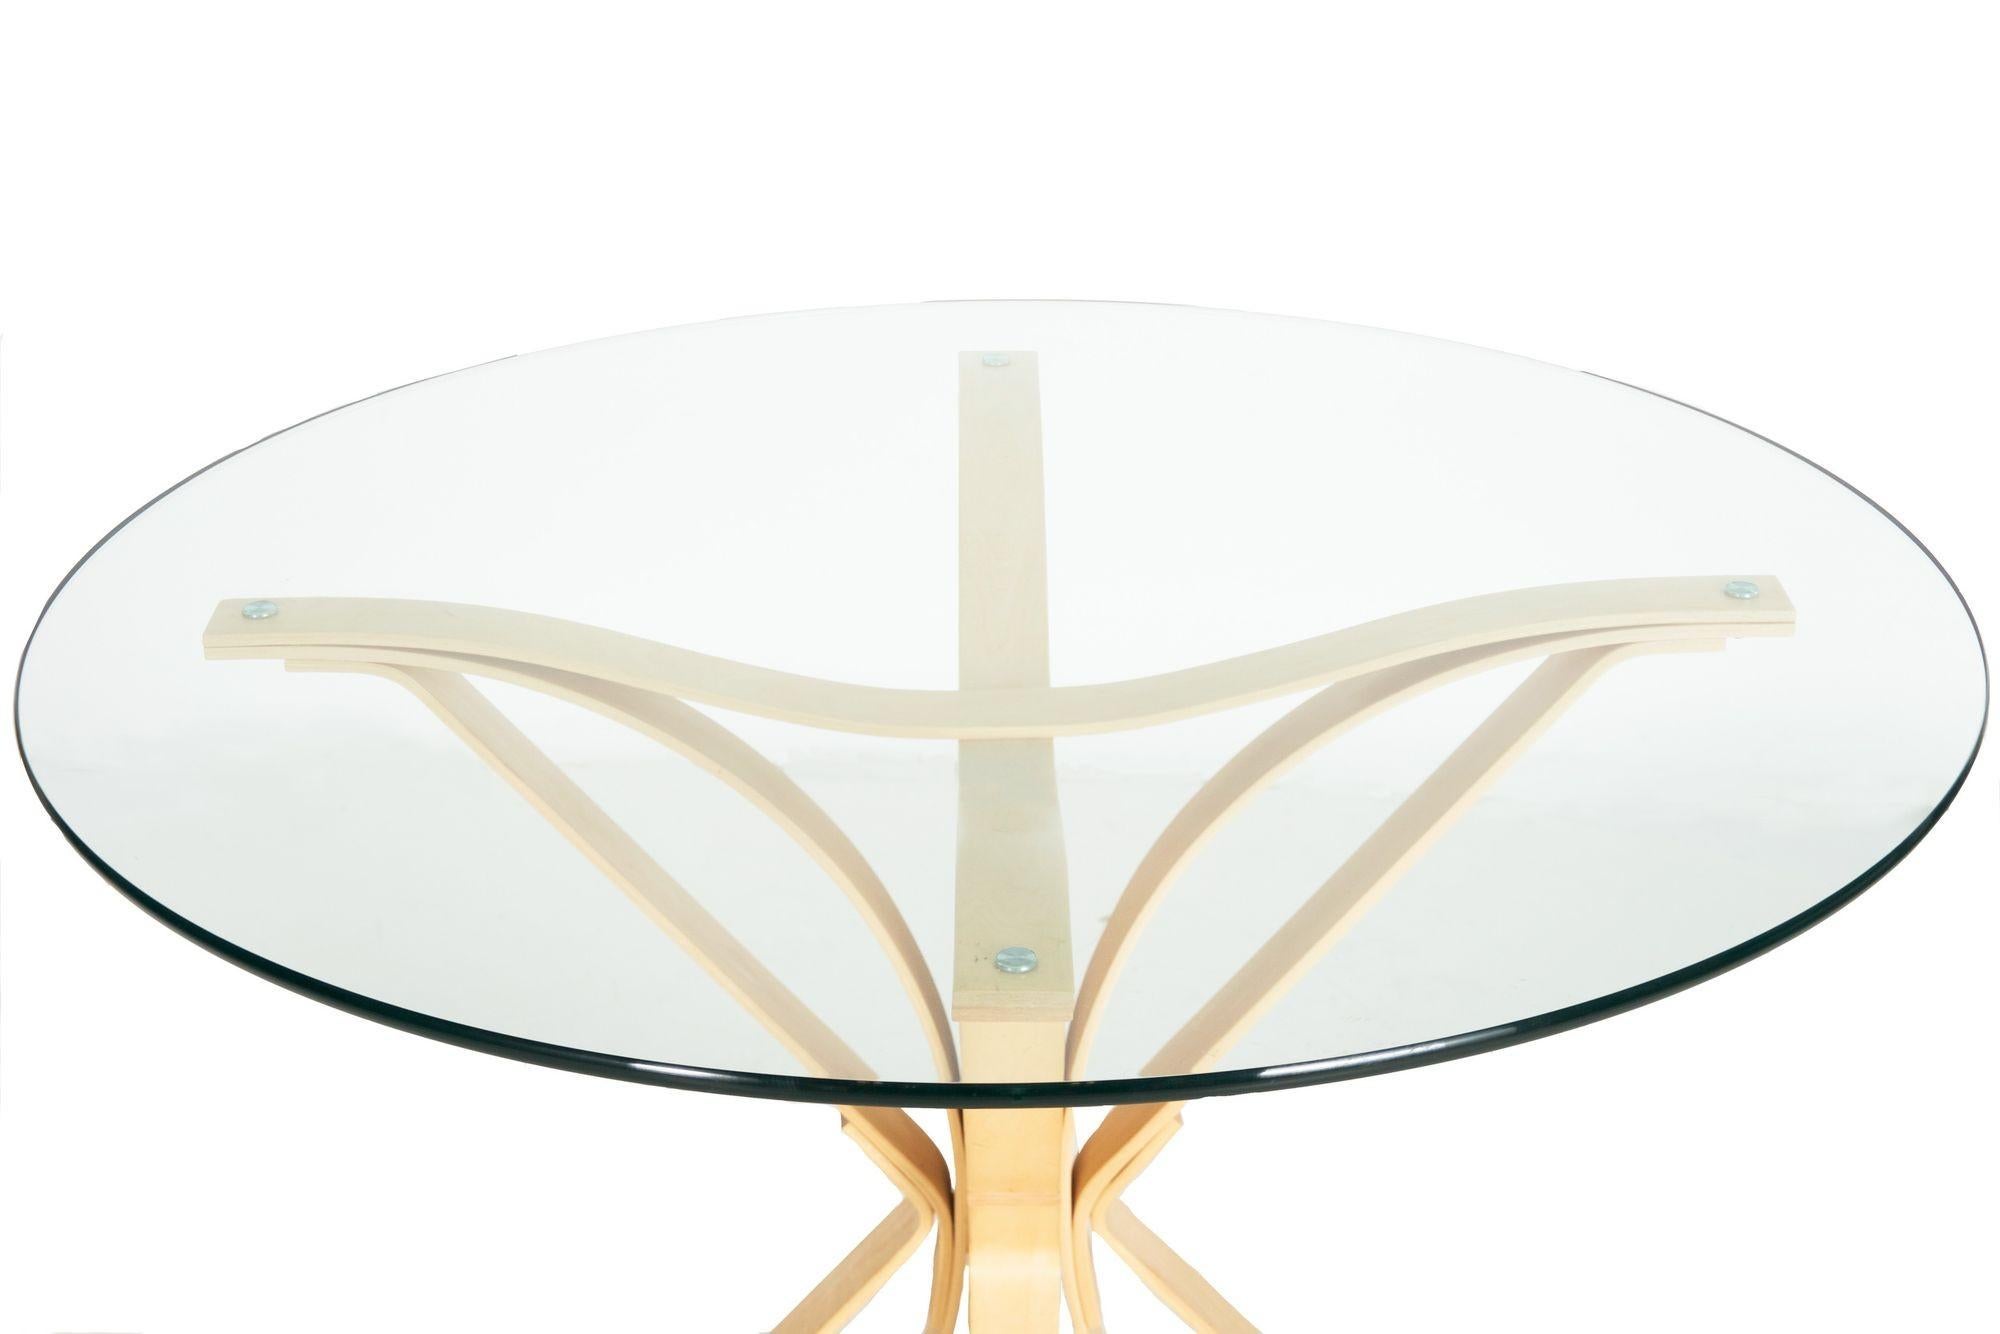 American Frank Gehry for Knoll “Face off” Laminated Maple Center Table, circa 1998